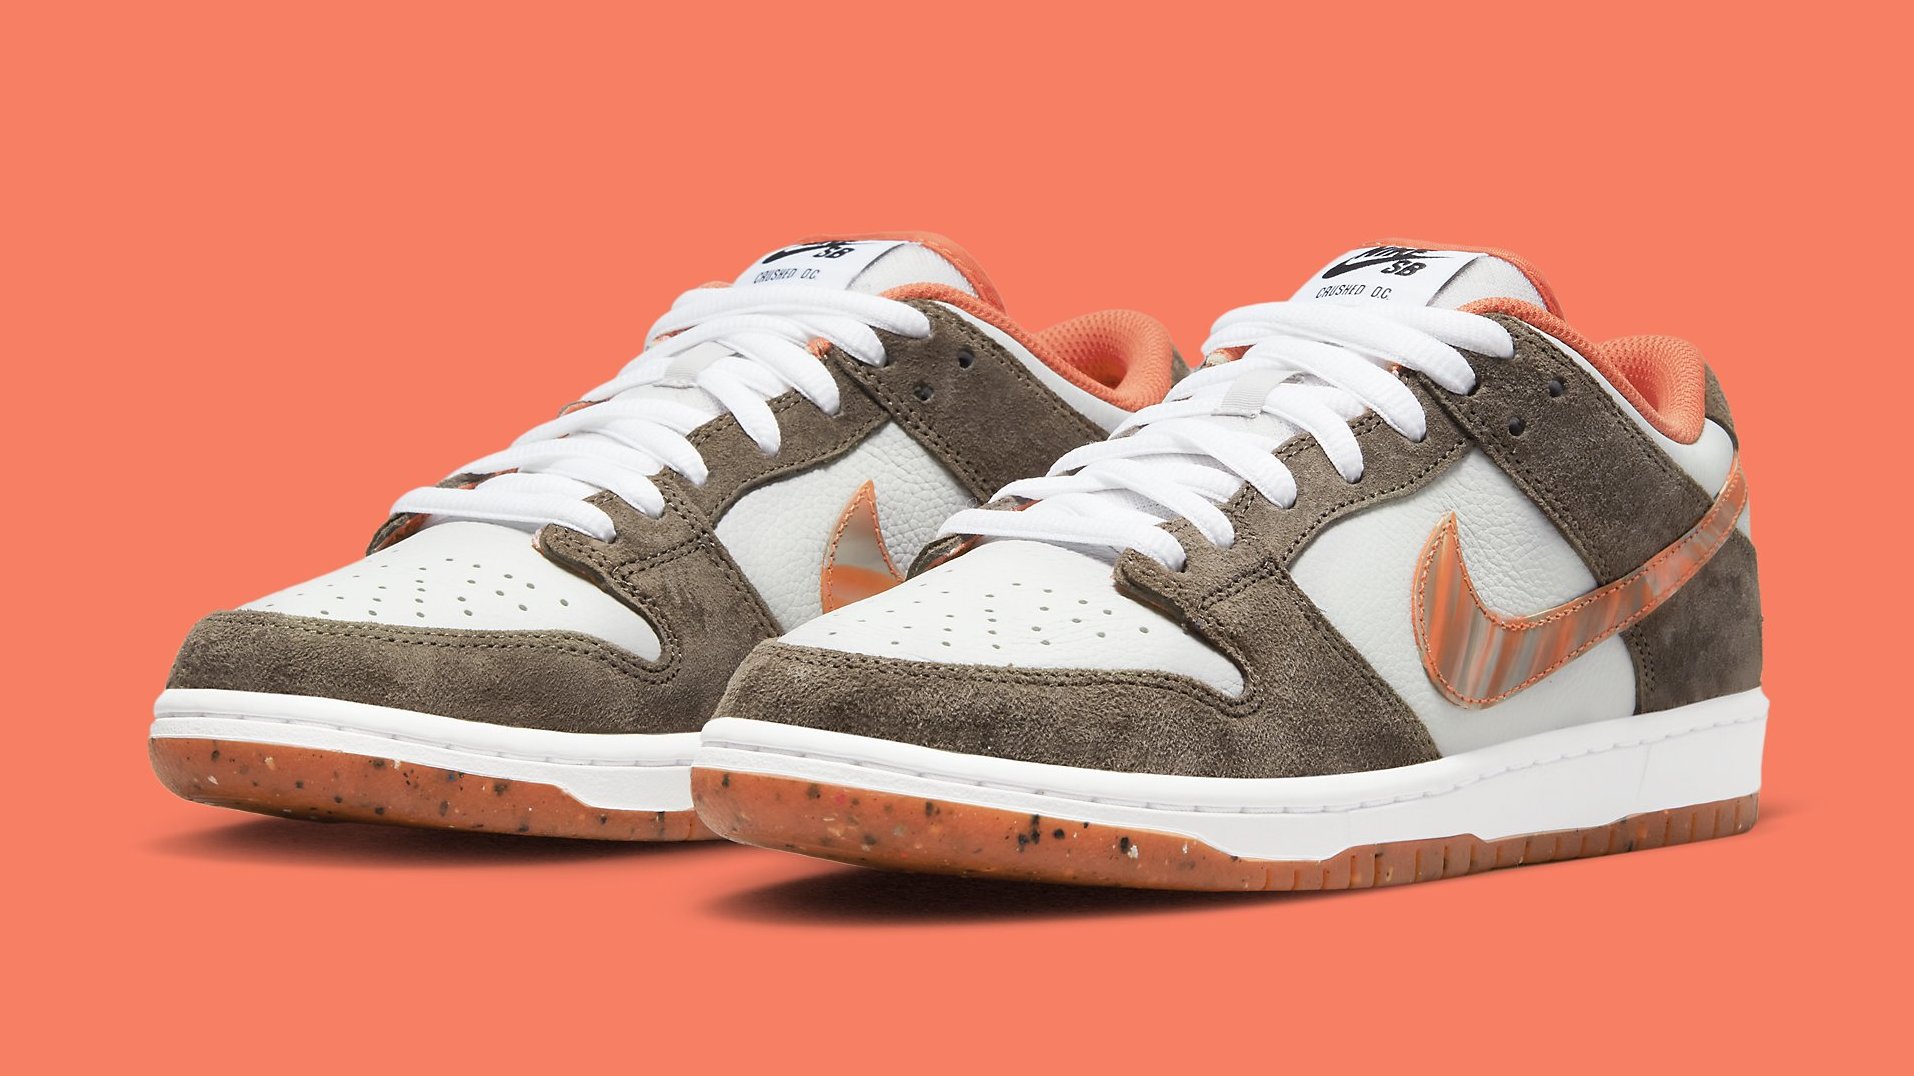 Crushed Skate Shop's Nike SB Collab Drops This